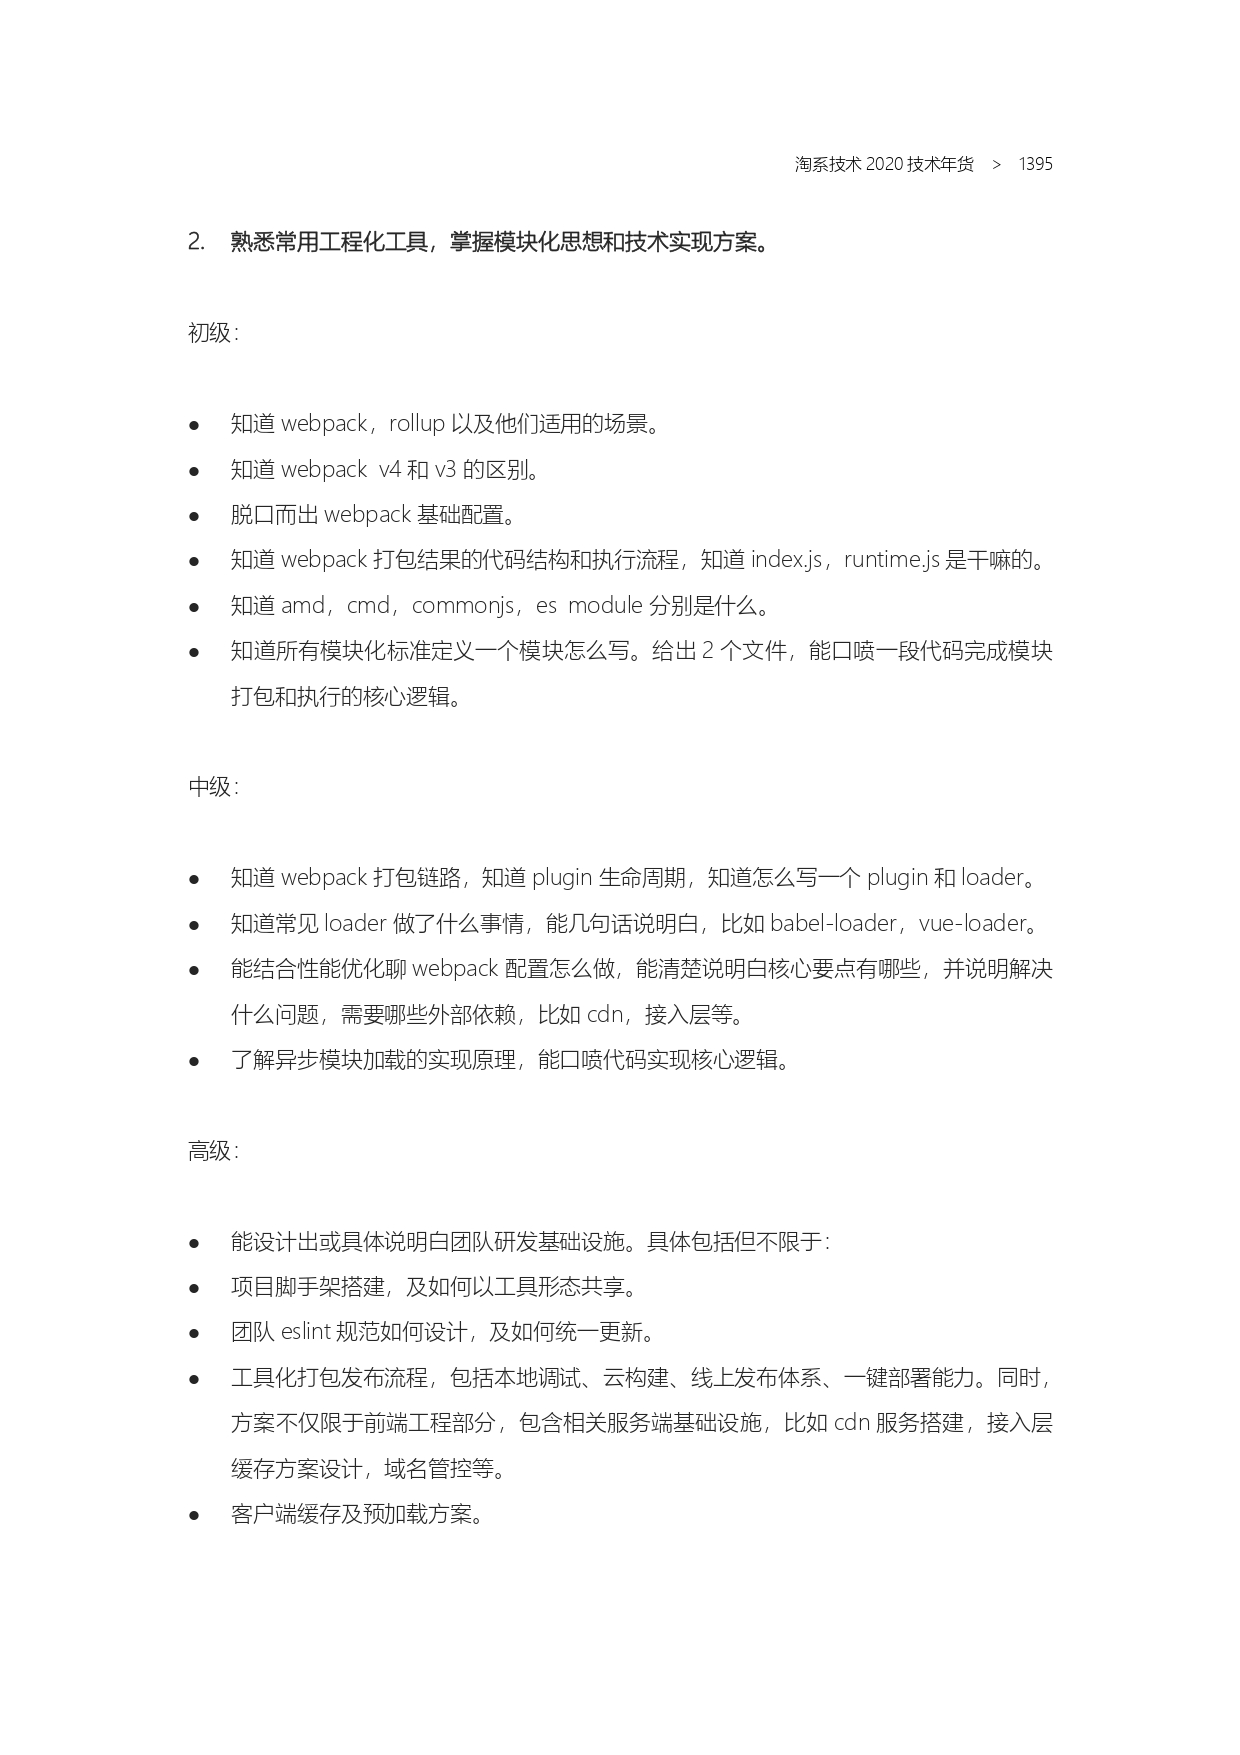 The Complete Works of Tao Technology 2020-1313-1671-1-195_page-0083.jpg